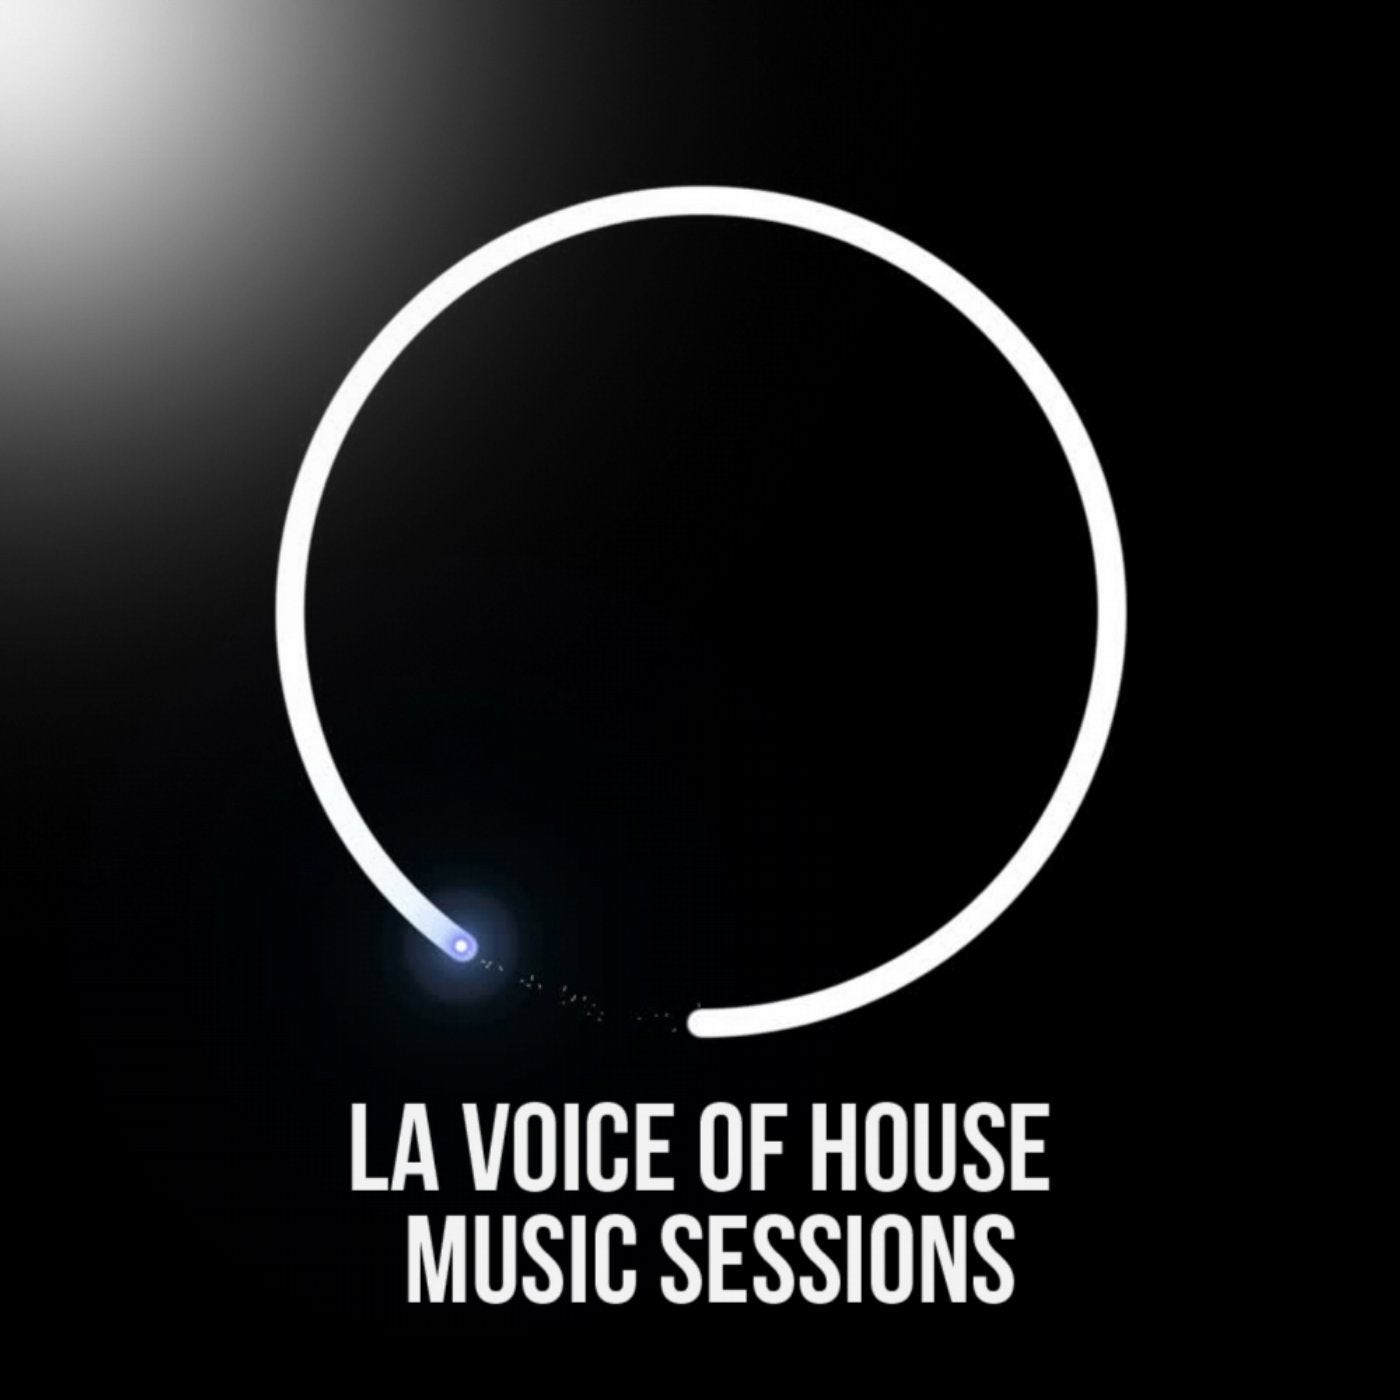 LA Voice Of House Music Sessions